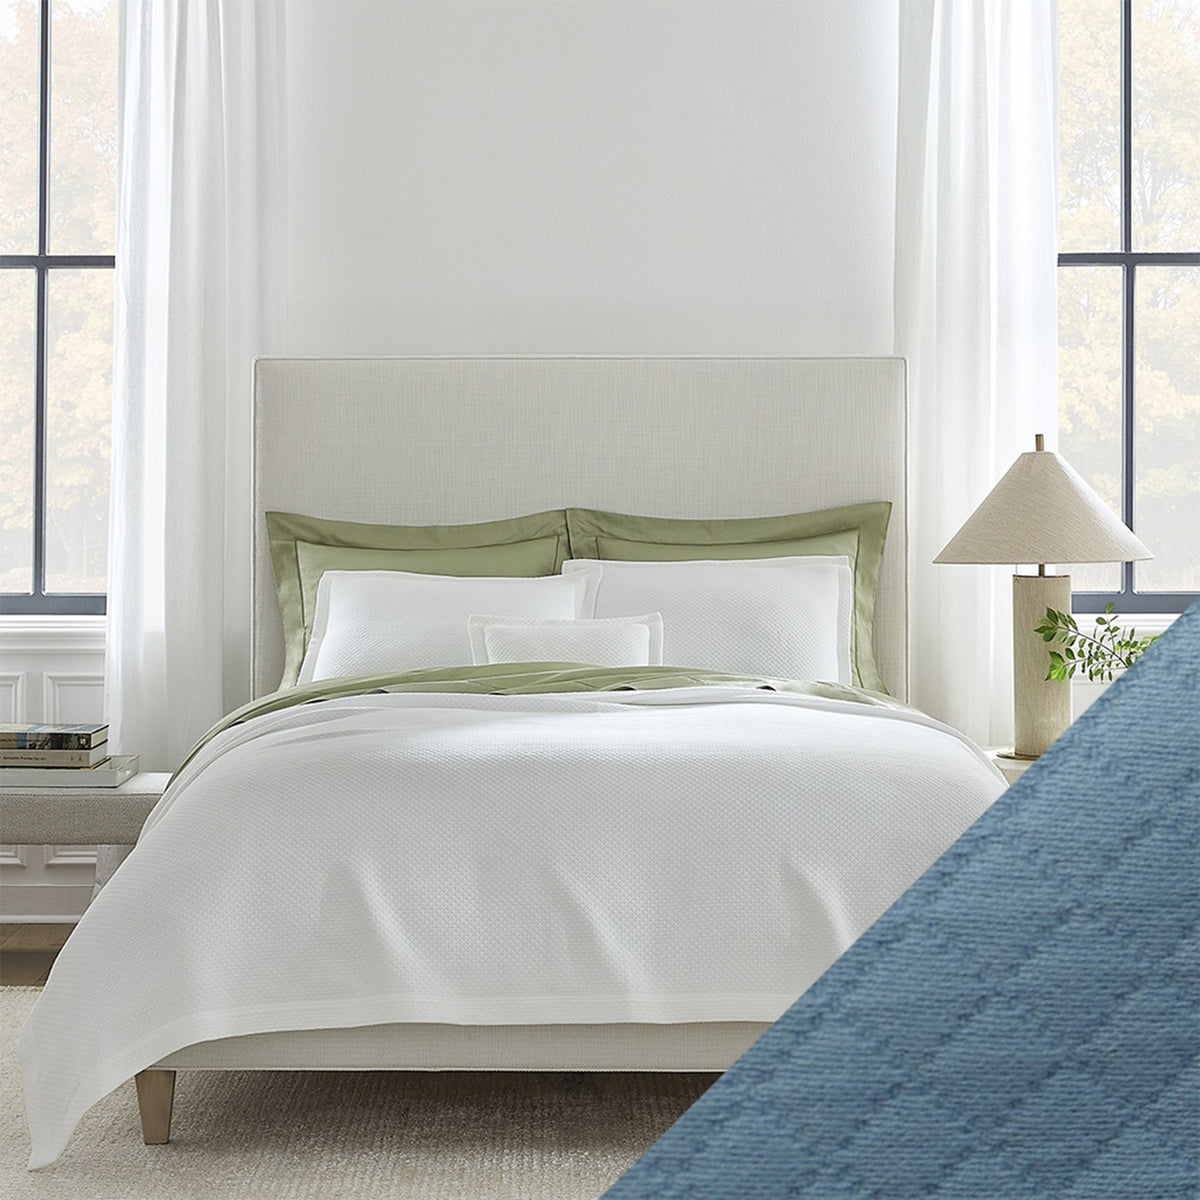 Full View of Sferra Rombo Bedding with Swatch Sea Color